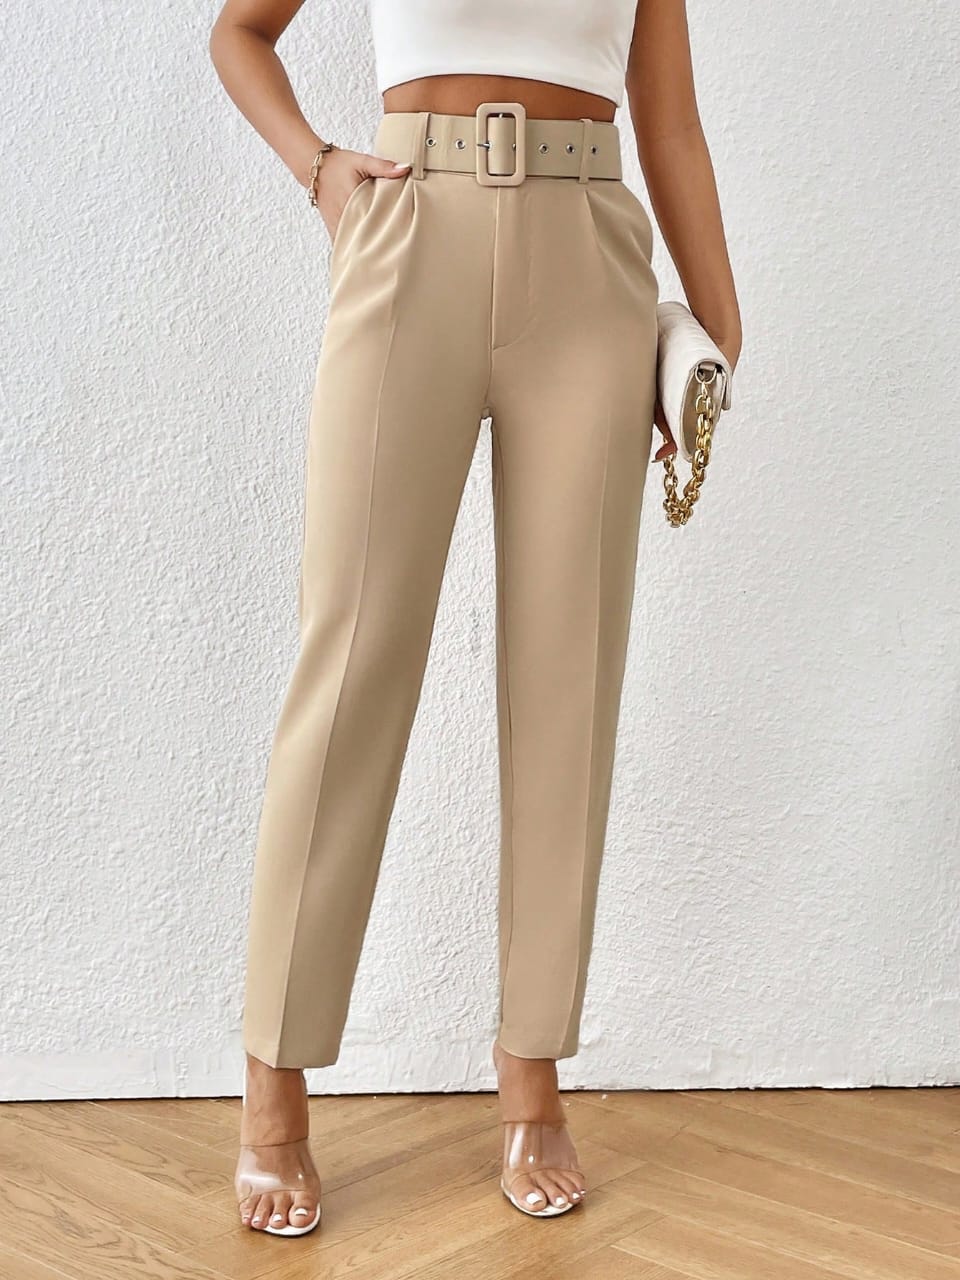 Zara Basic Ankle Pants | Suits for women, Ankle pants, Trousers women